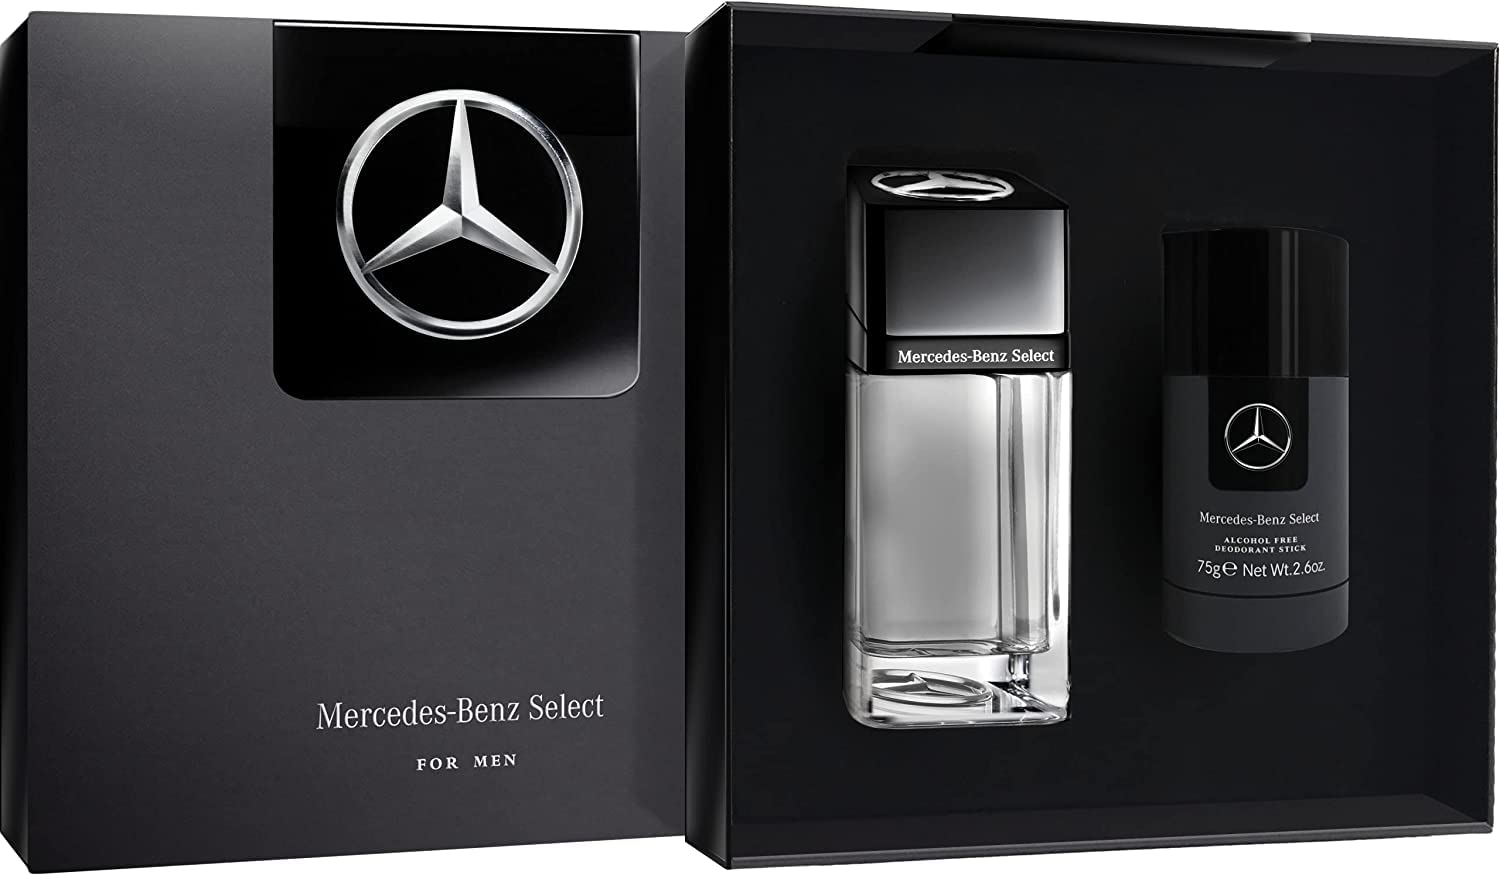 Mercedes-Benz Select - Men's Curated Gift Set Duo In Iconic Original Elegant Scent Select - Includes Eau De Toilette Spray And Deodorant Stick ...